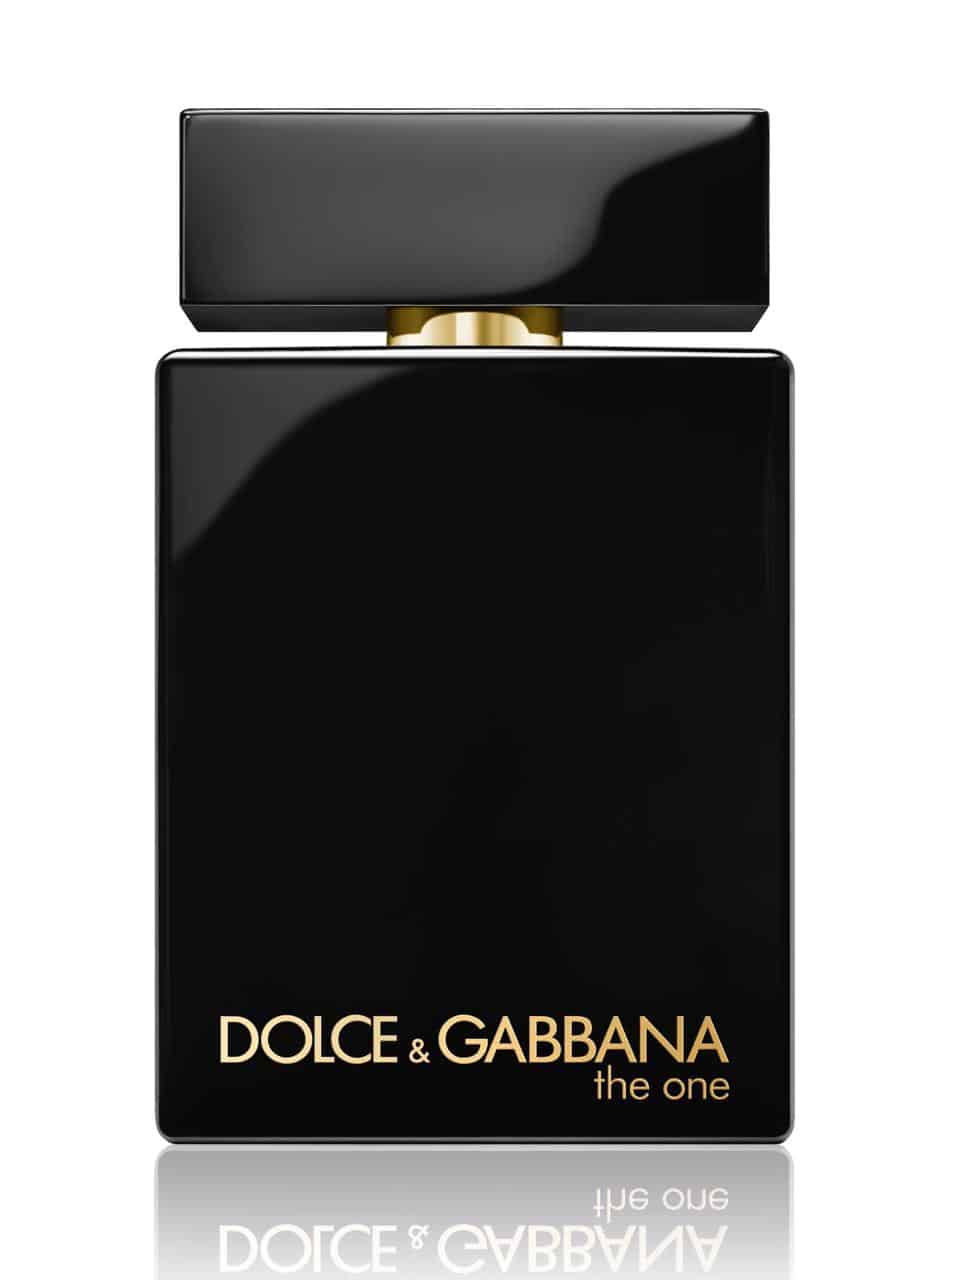 dolce and gabbana father's day isipho